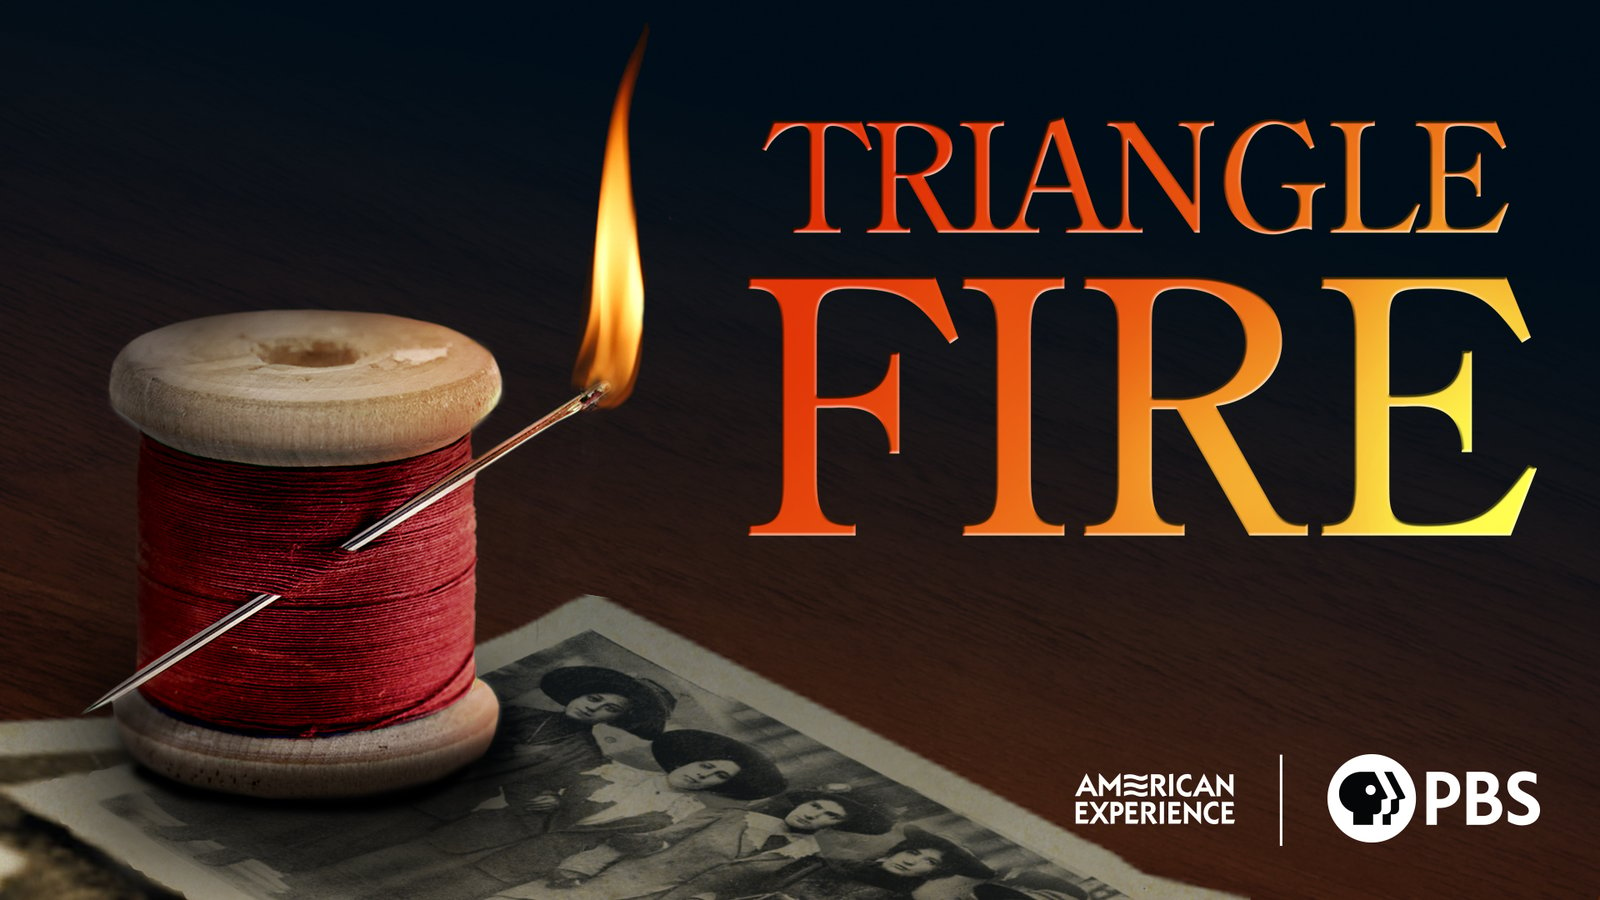 Triangle Fire - A Deadly Factory Accident in New York